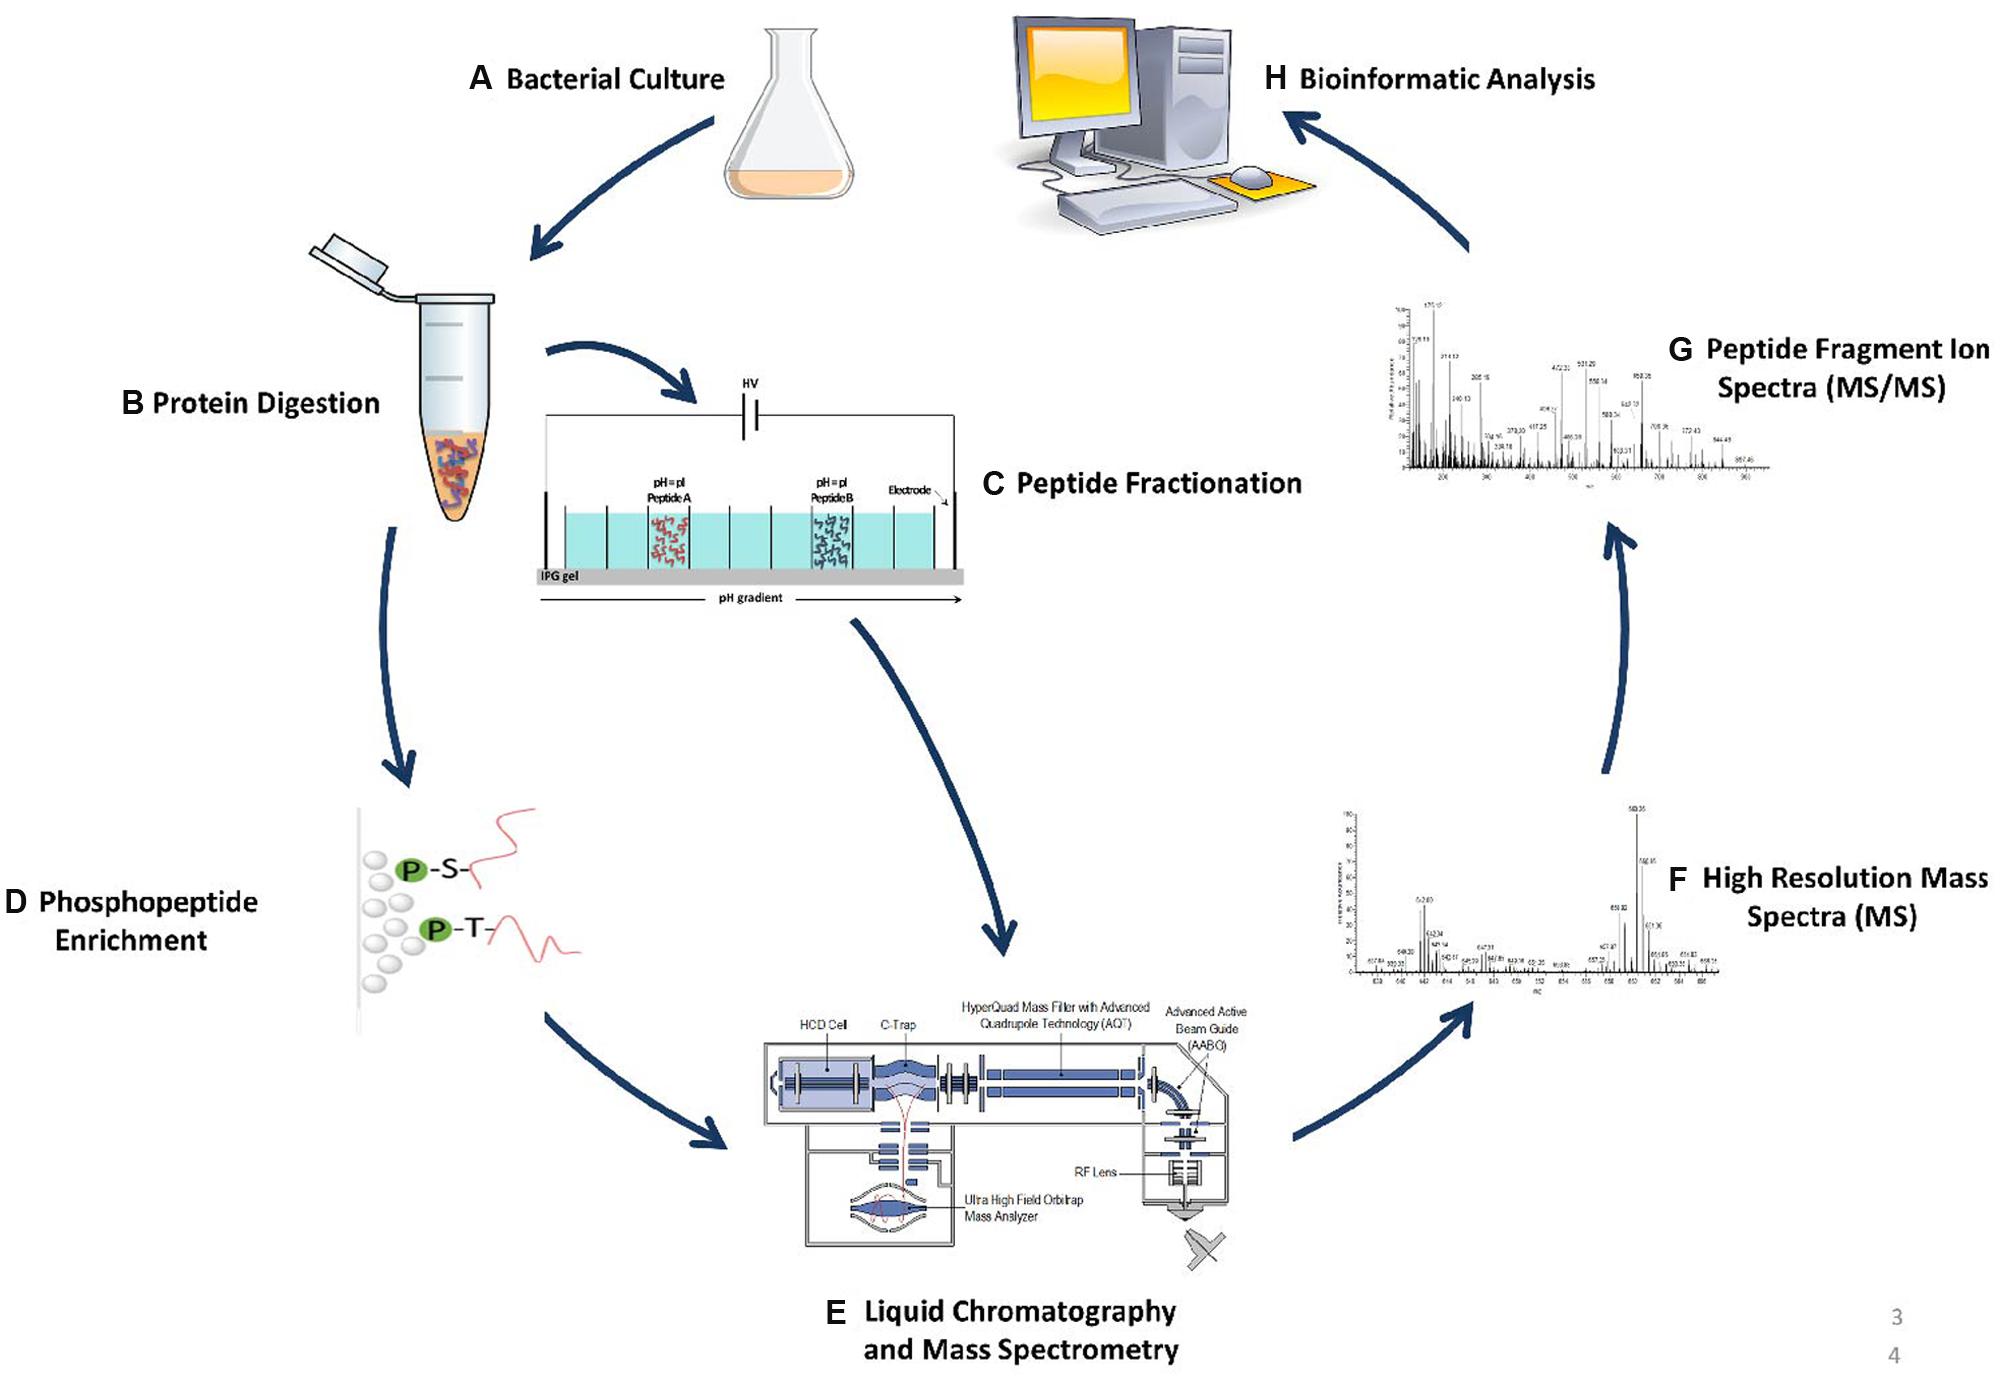 Frontiers Mass Spectrometry Based Bacterial Proteomics Focus On Dermatologic Microbial Pathogens